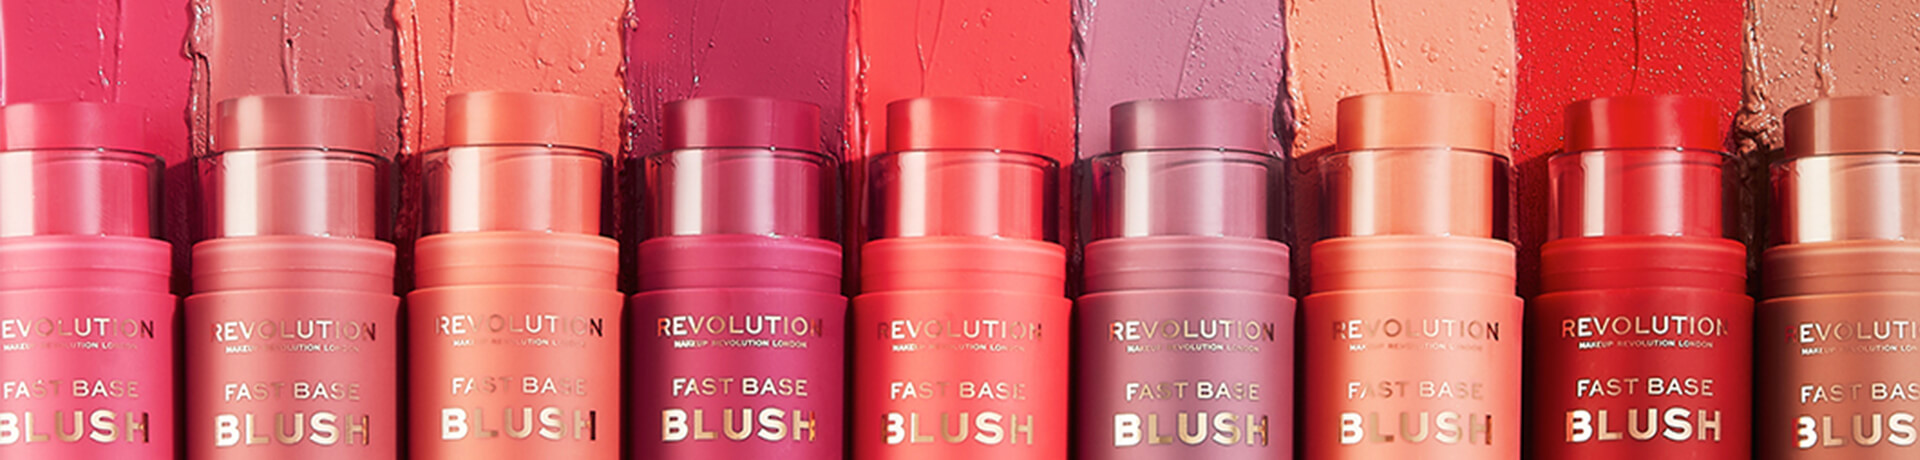 Unsure Of How To Find Your Perfect Blush Shade?